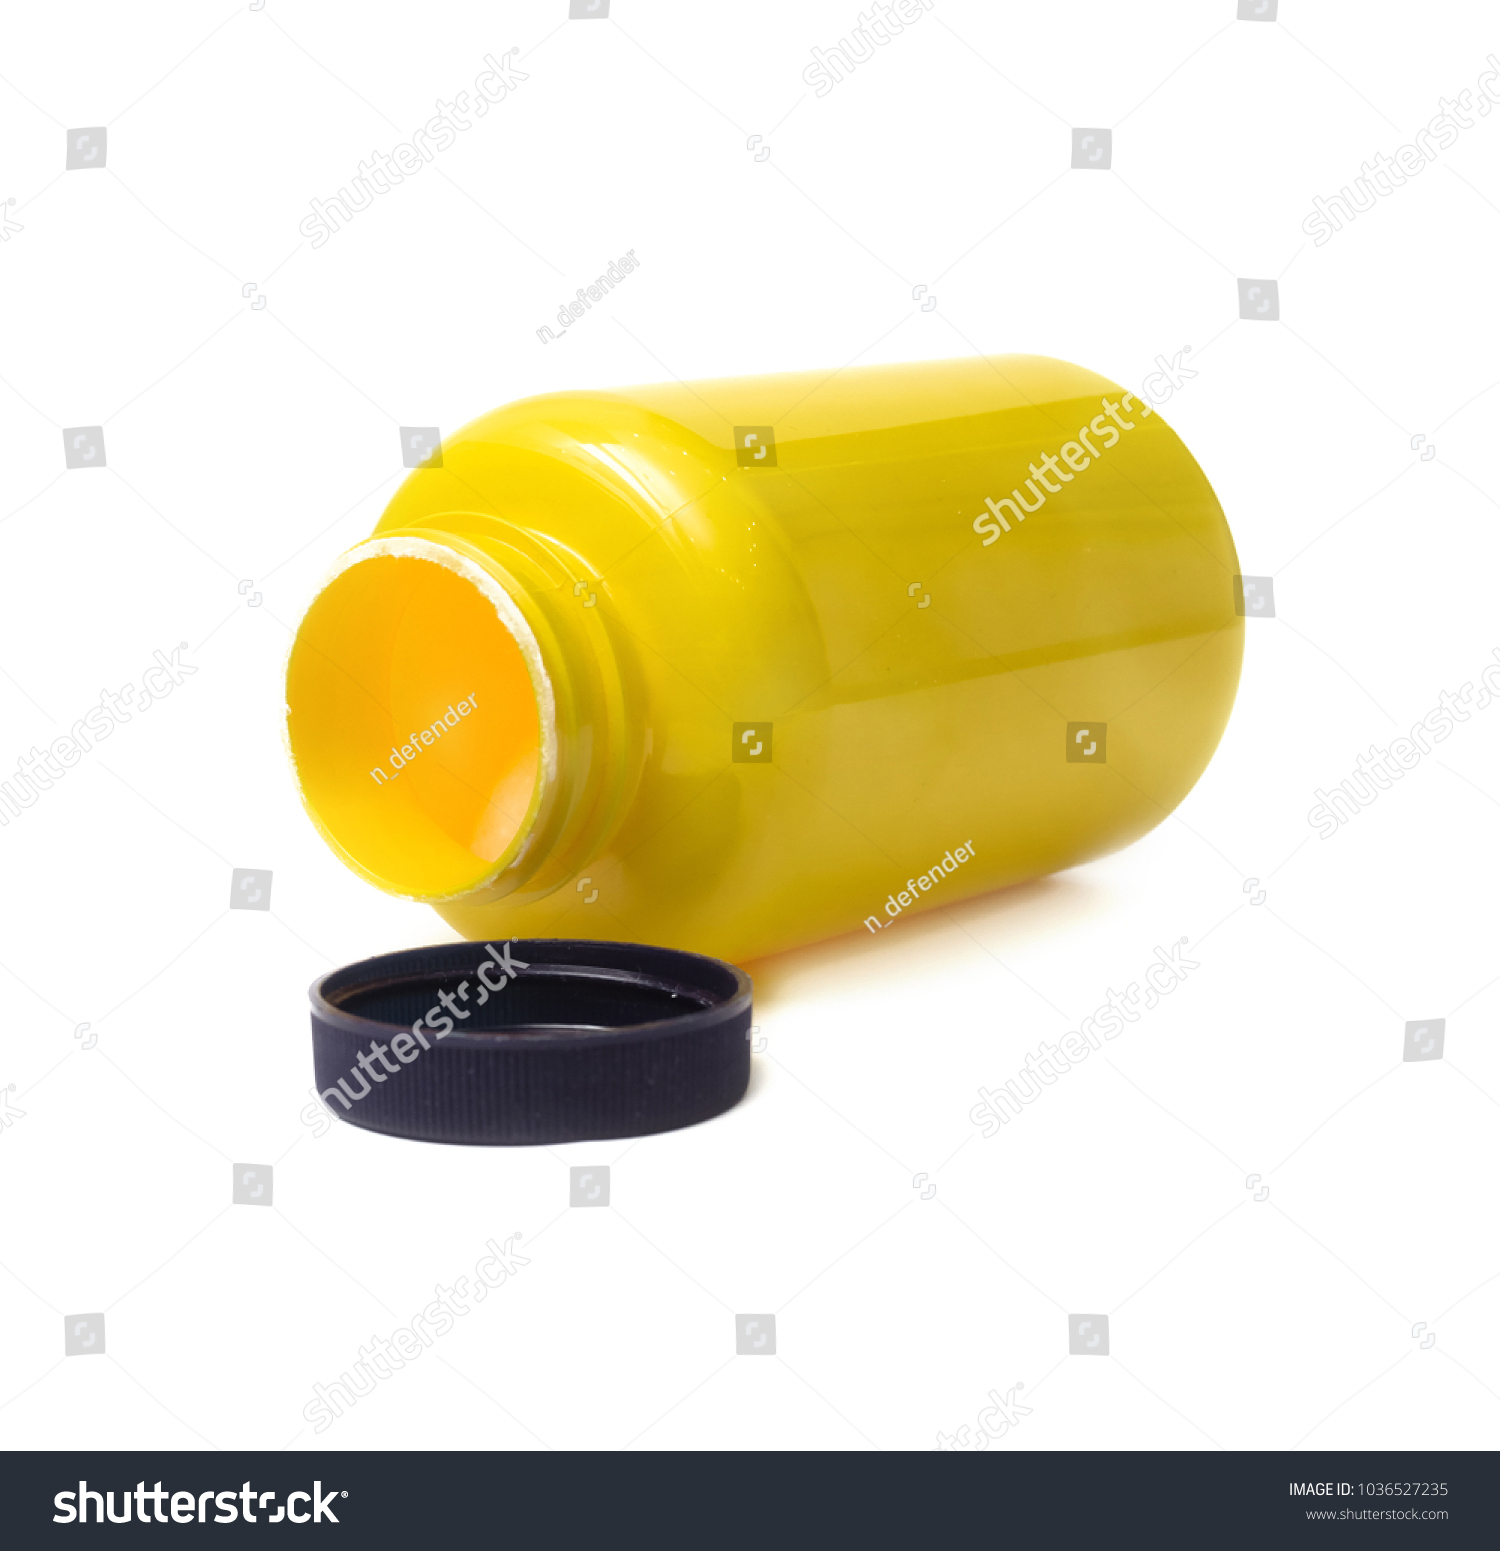 Download Blank Yellow Bottle Sports Nutrition Isolated Objects Stock Image 1036527235 PSD Mockup Templates